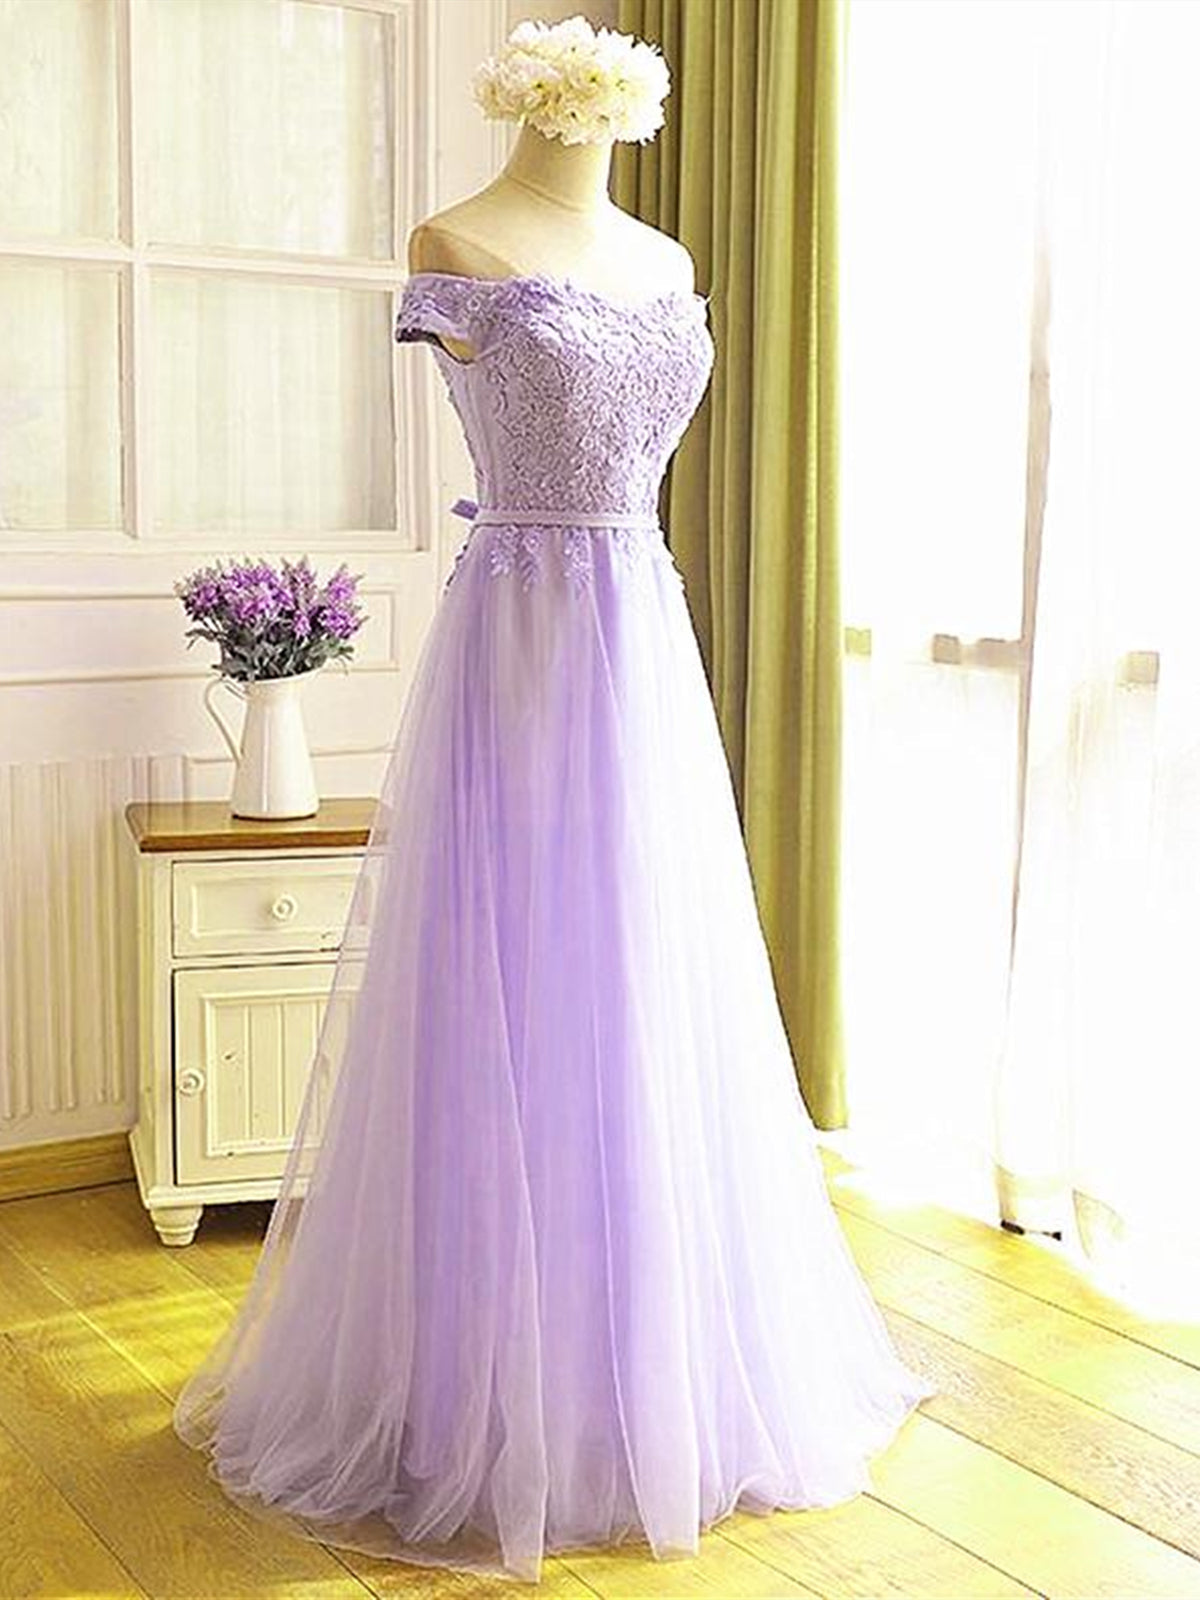 Homecoming Dress Fitted, Off the Shoulder Purple Lace Prom Dresses, Purple Off Shoulder Lace Formal Bridesmaid Dresses